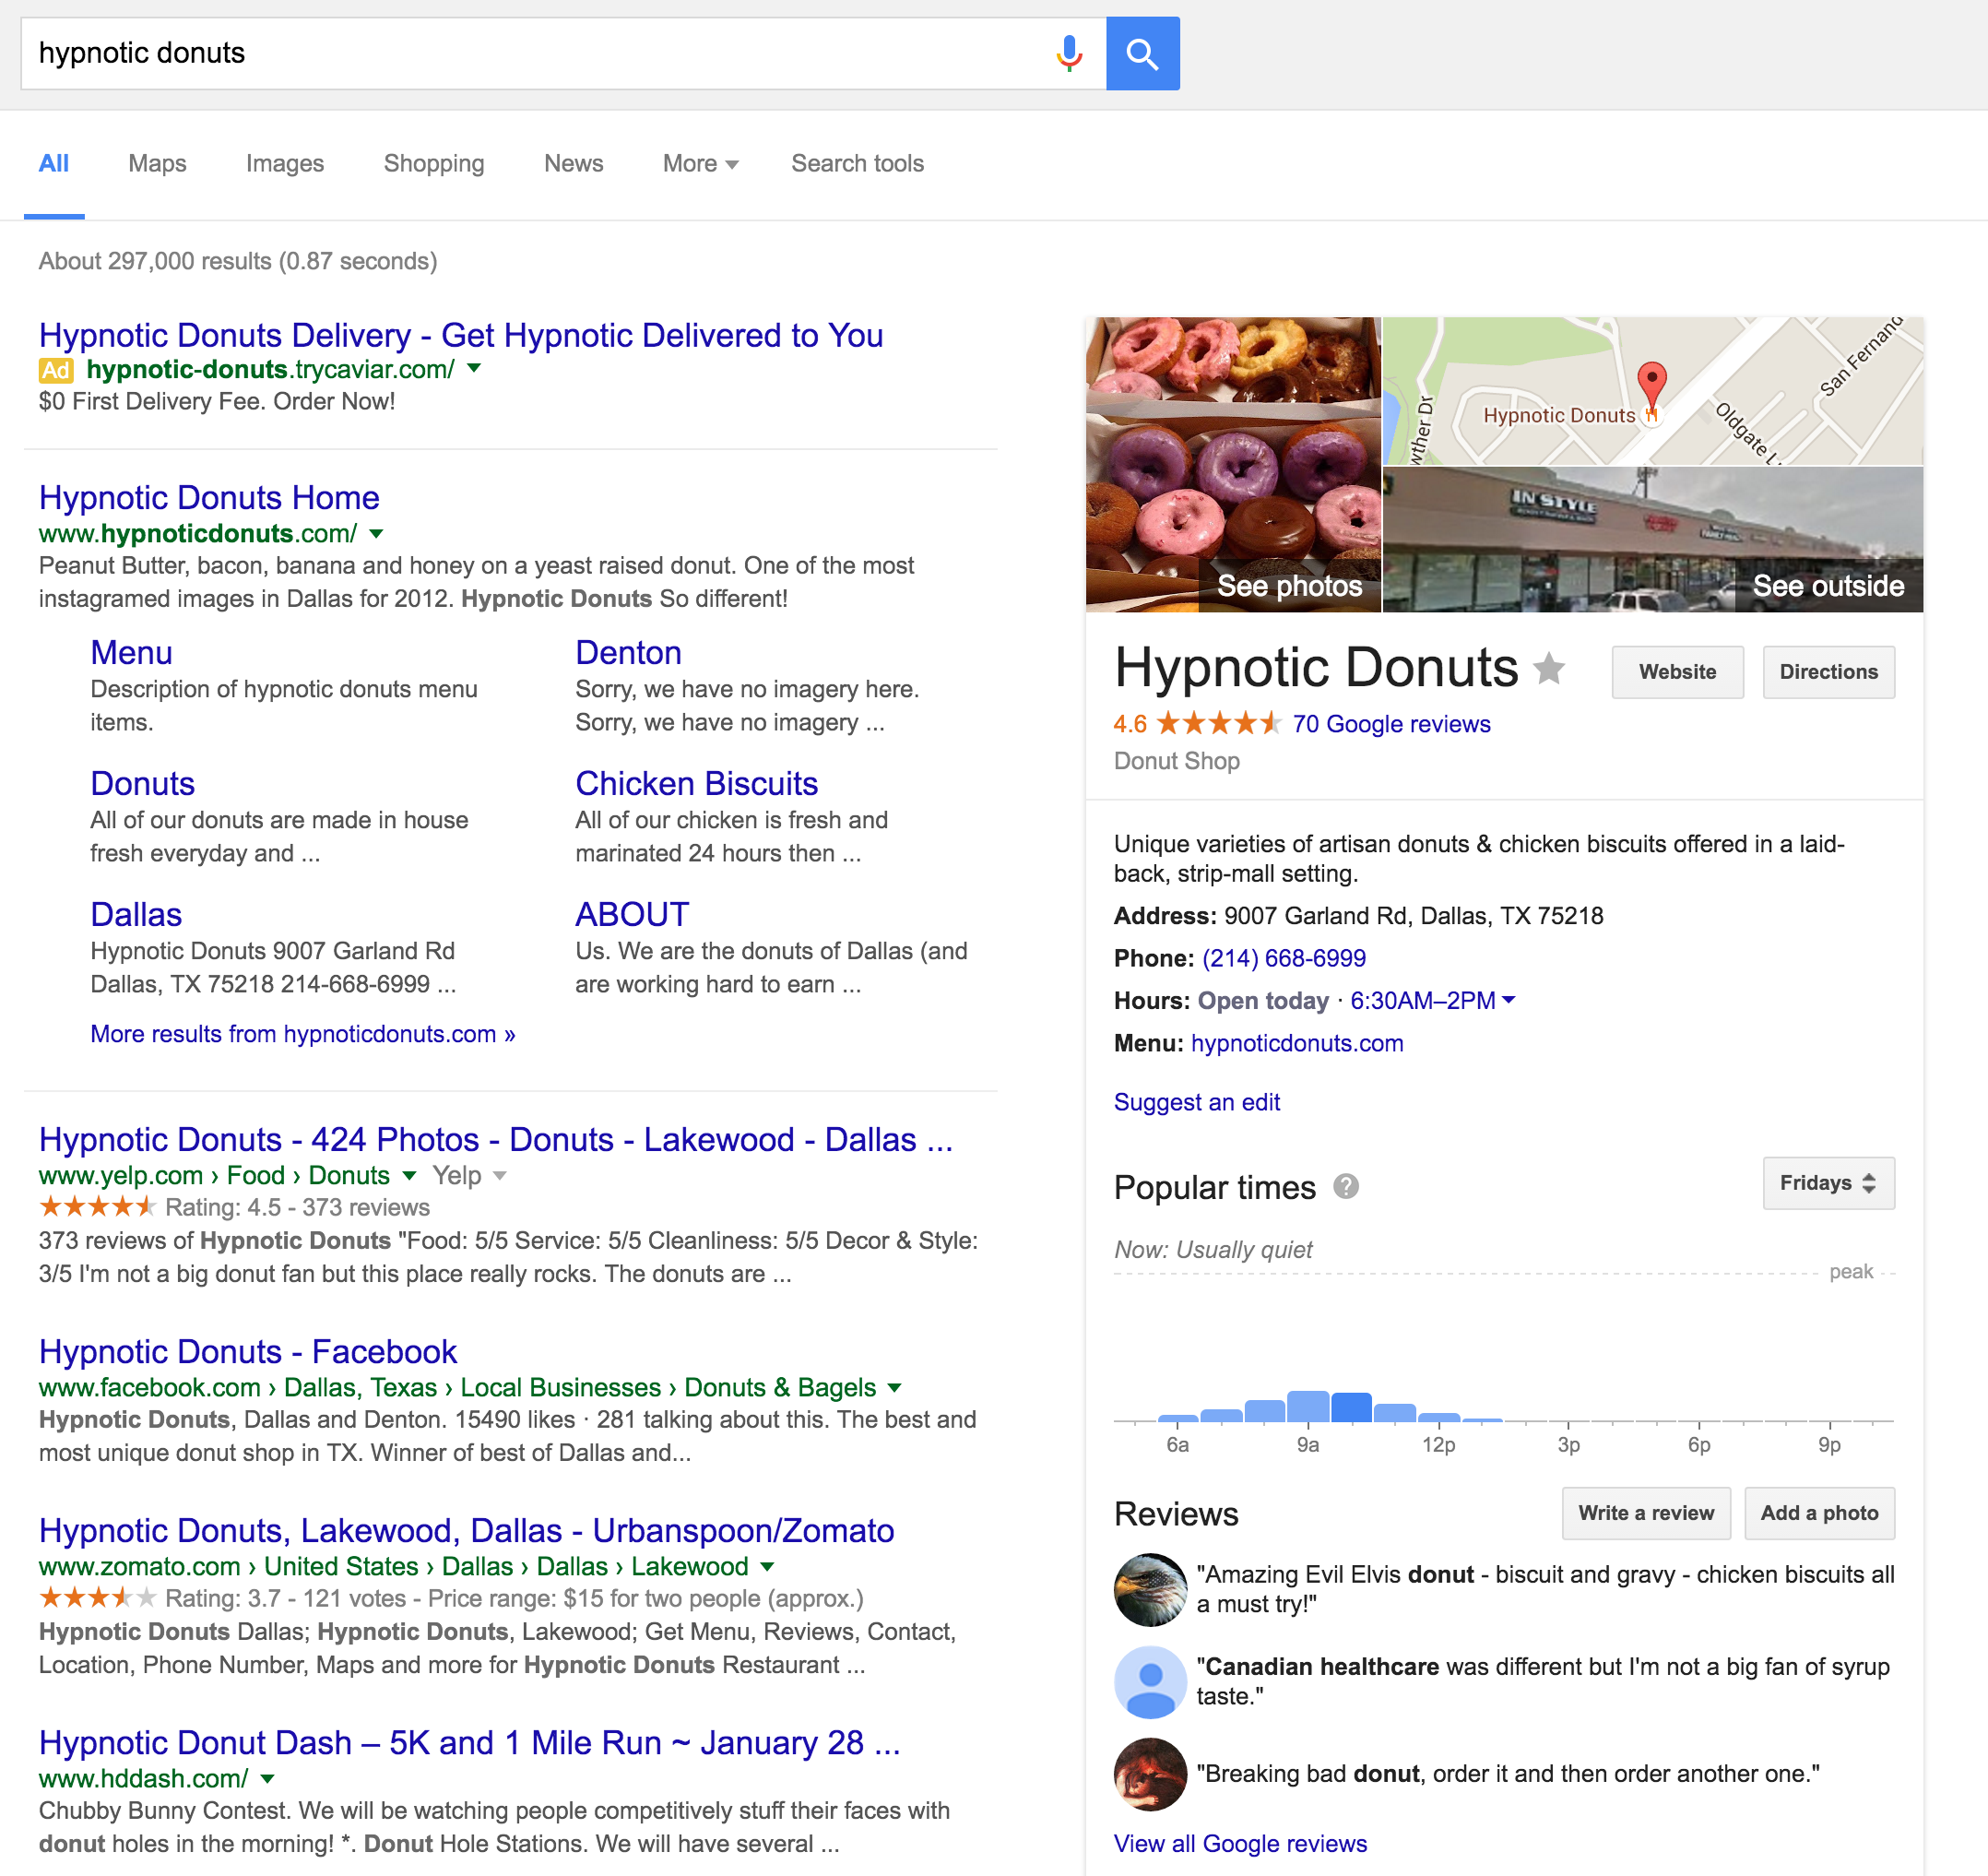  Example of how a Local Google+ page appears on Google's search results.